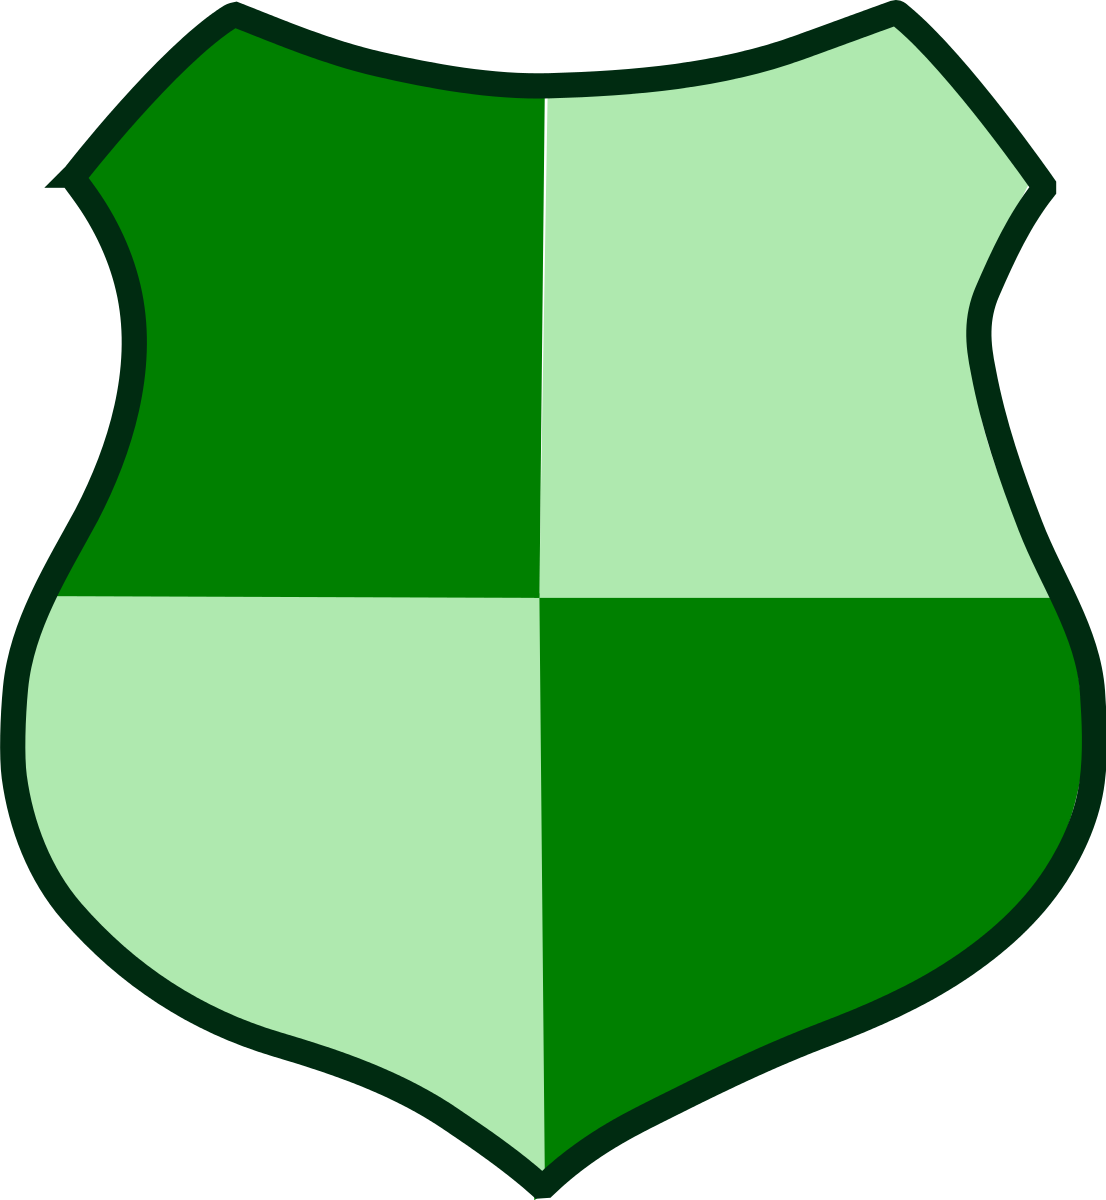 Shield images clipart